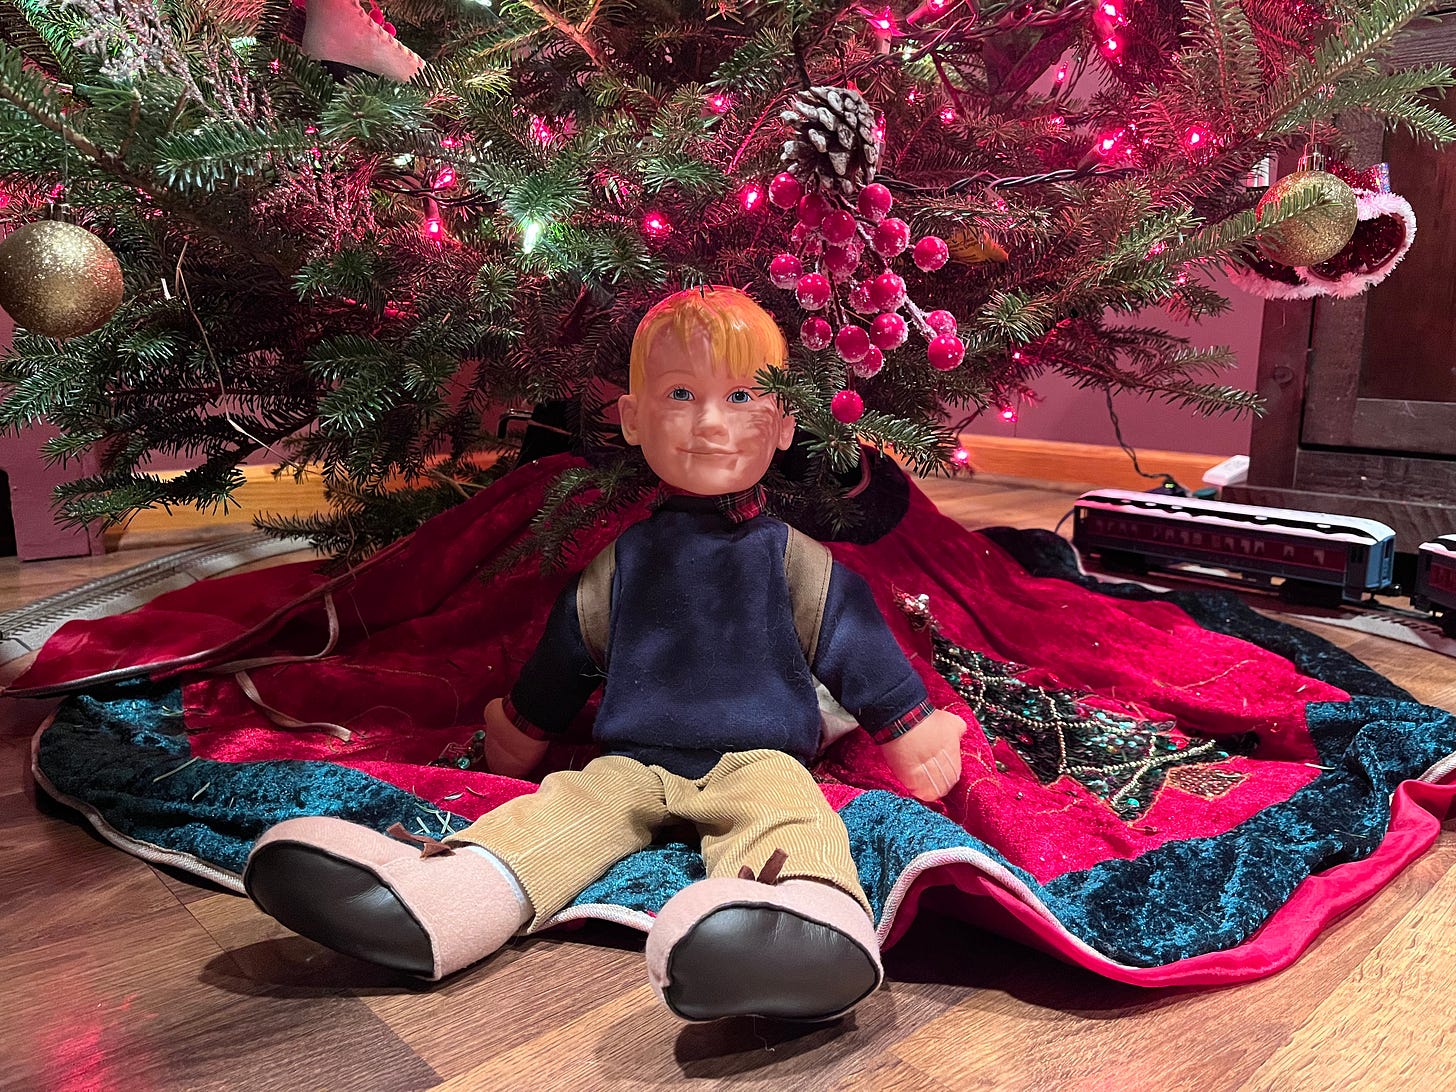 Home Alone Talking Kevin doll underneath the Christmas tree.